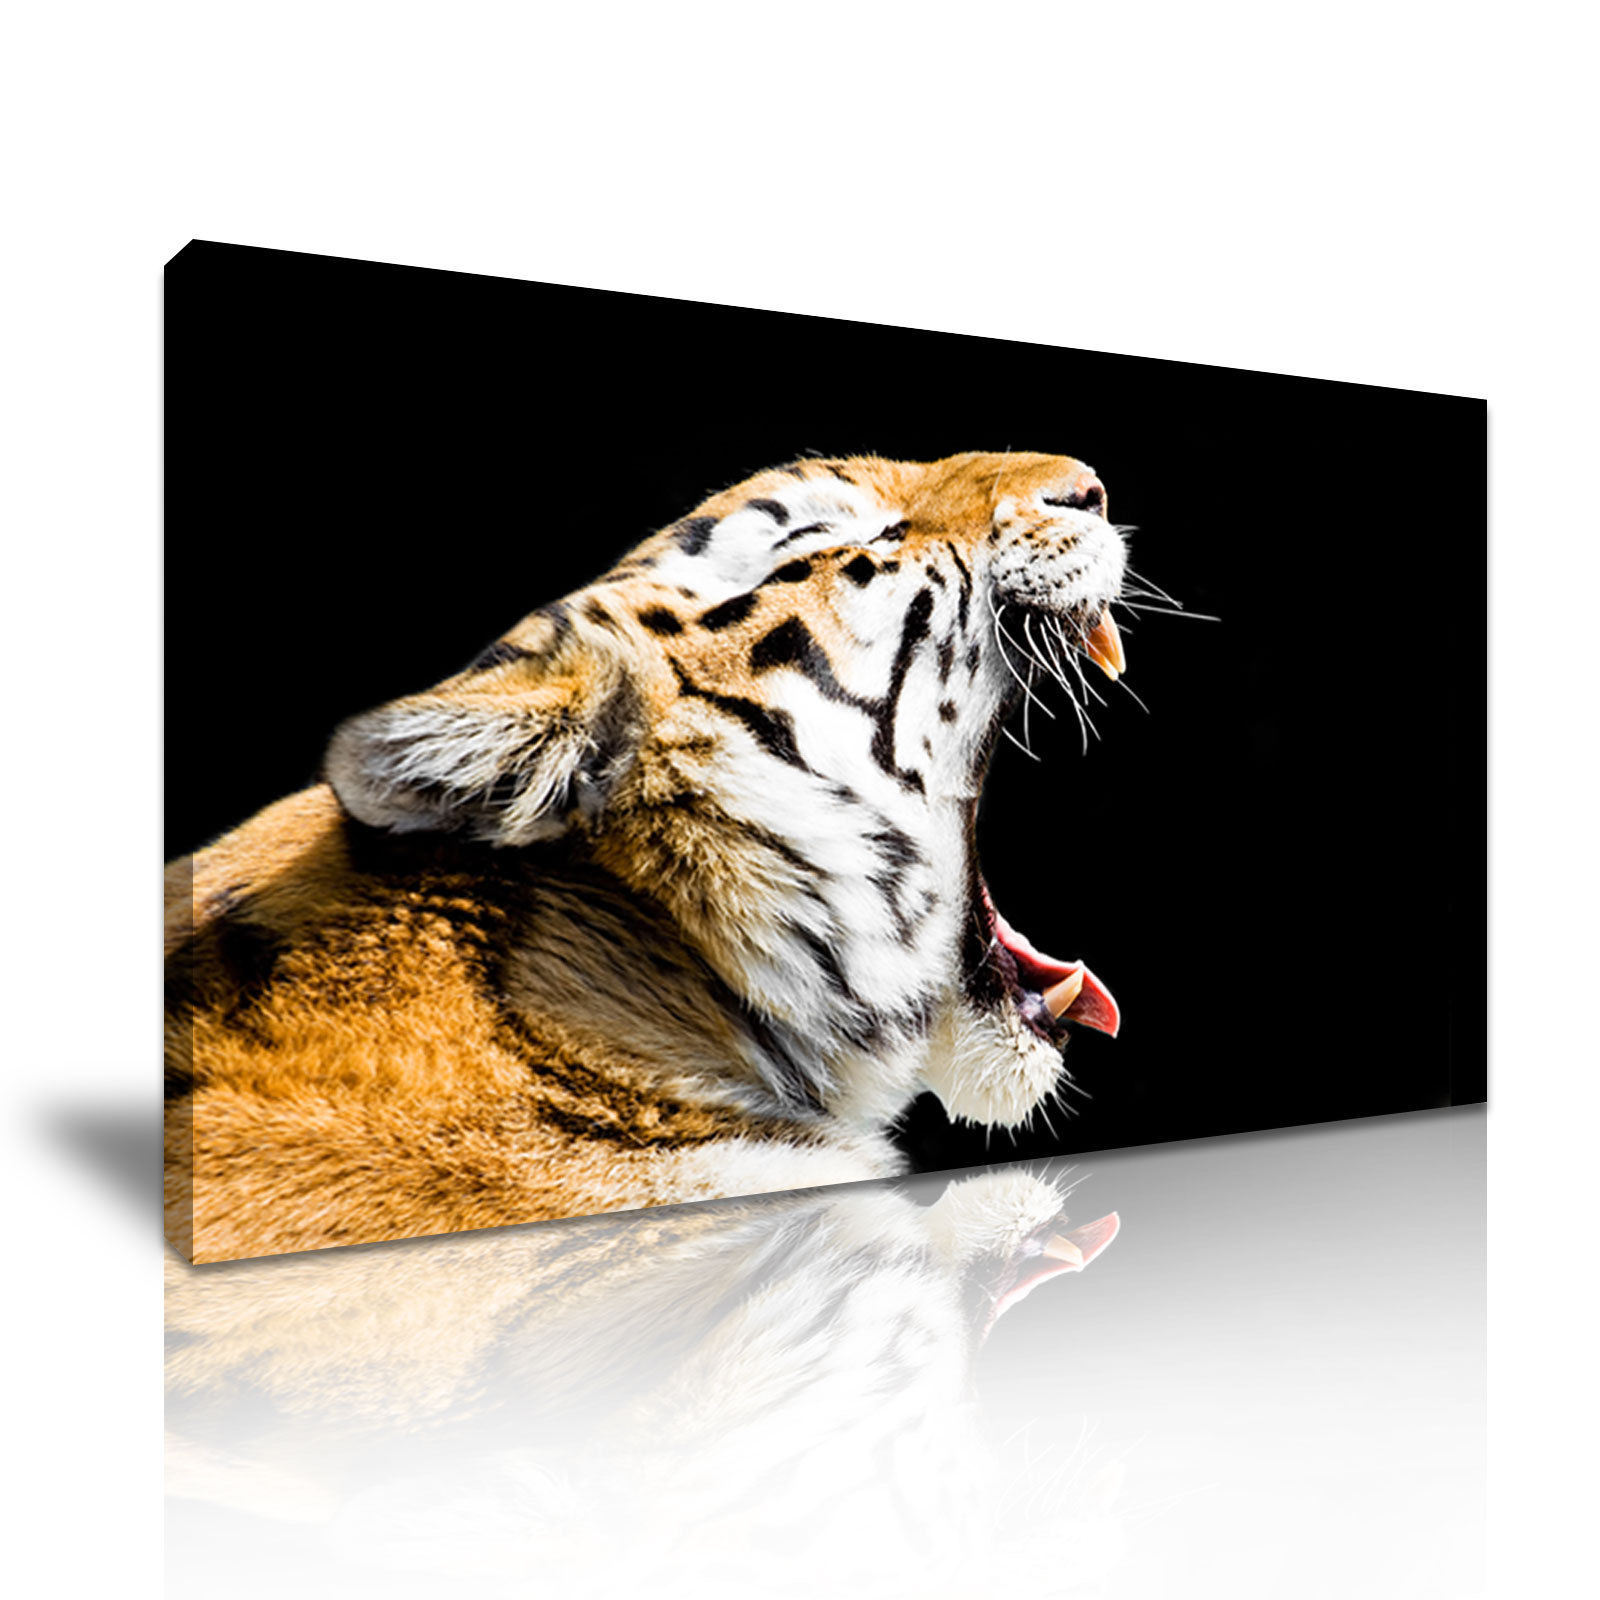 Open Mouth of The Tiger Canvas Painting for Decoration